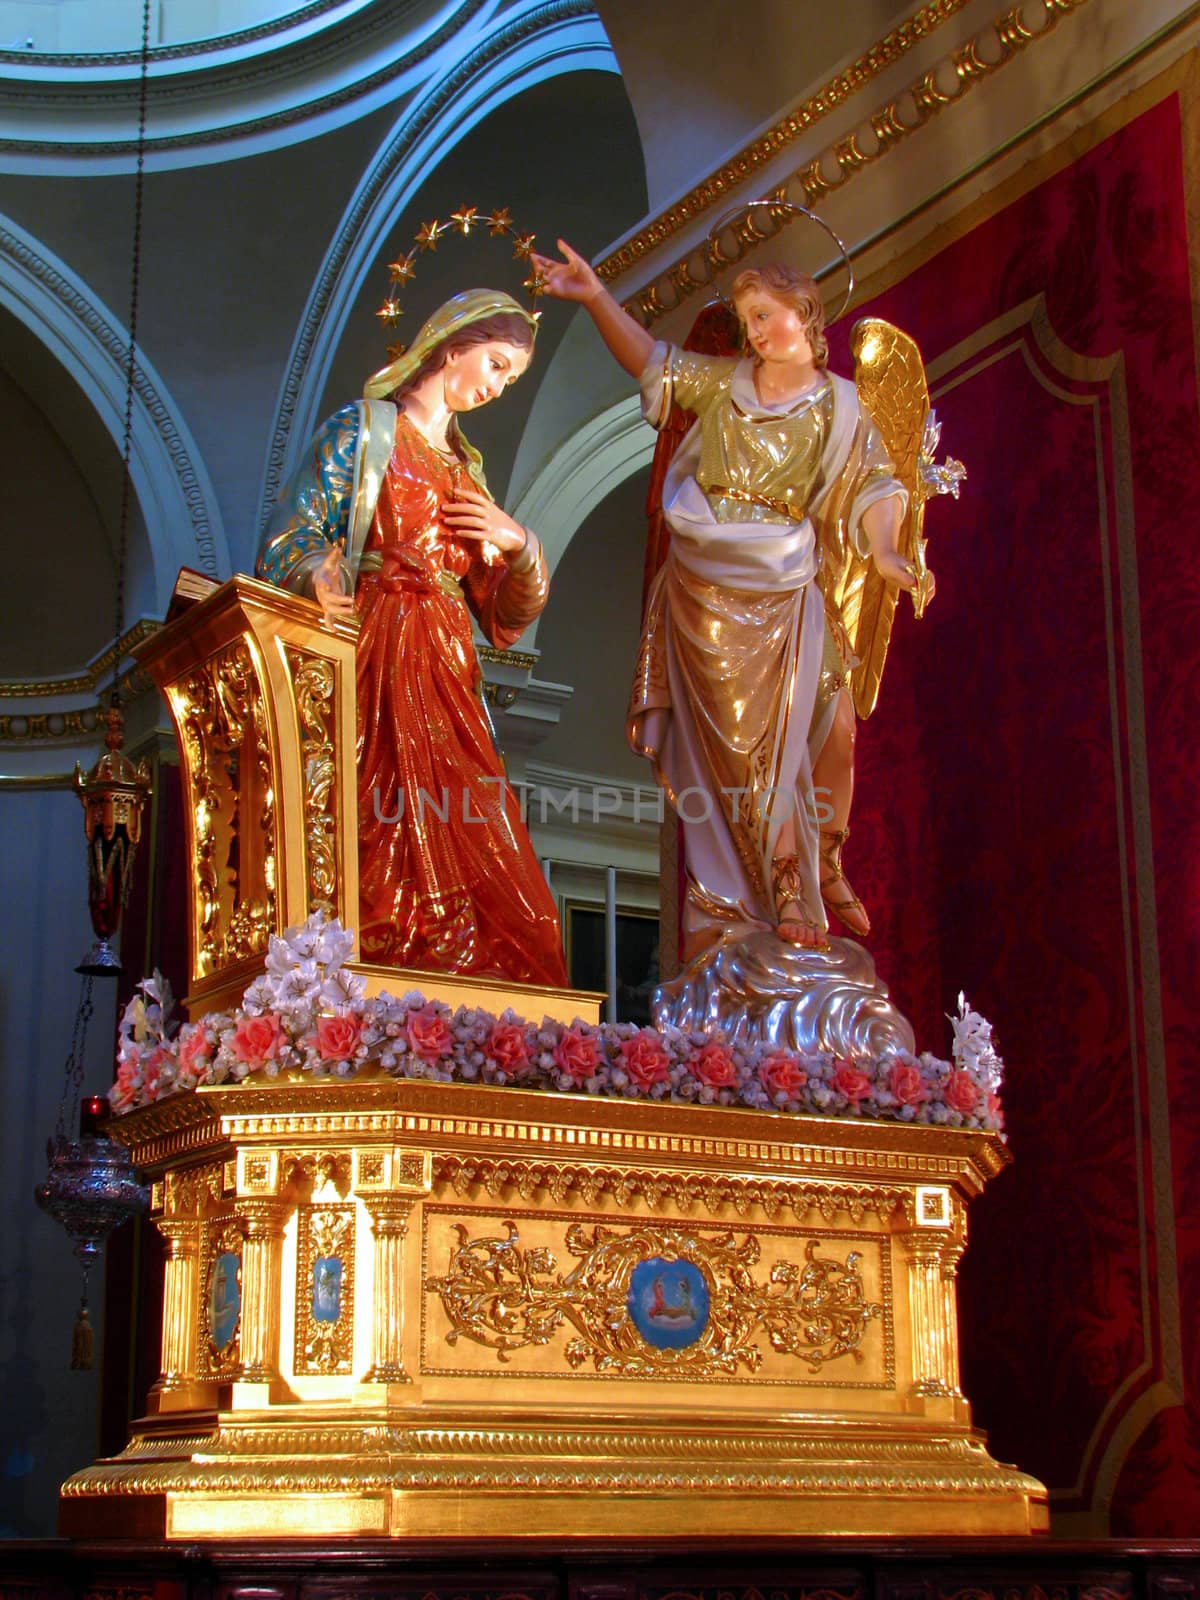 The statue representing The Annunciation of Our Lord in Tarxien, Malta.